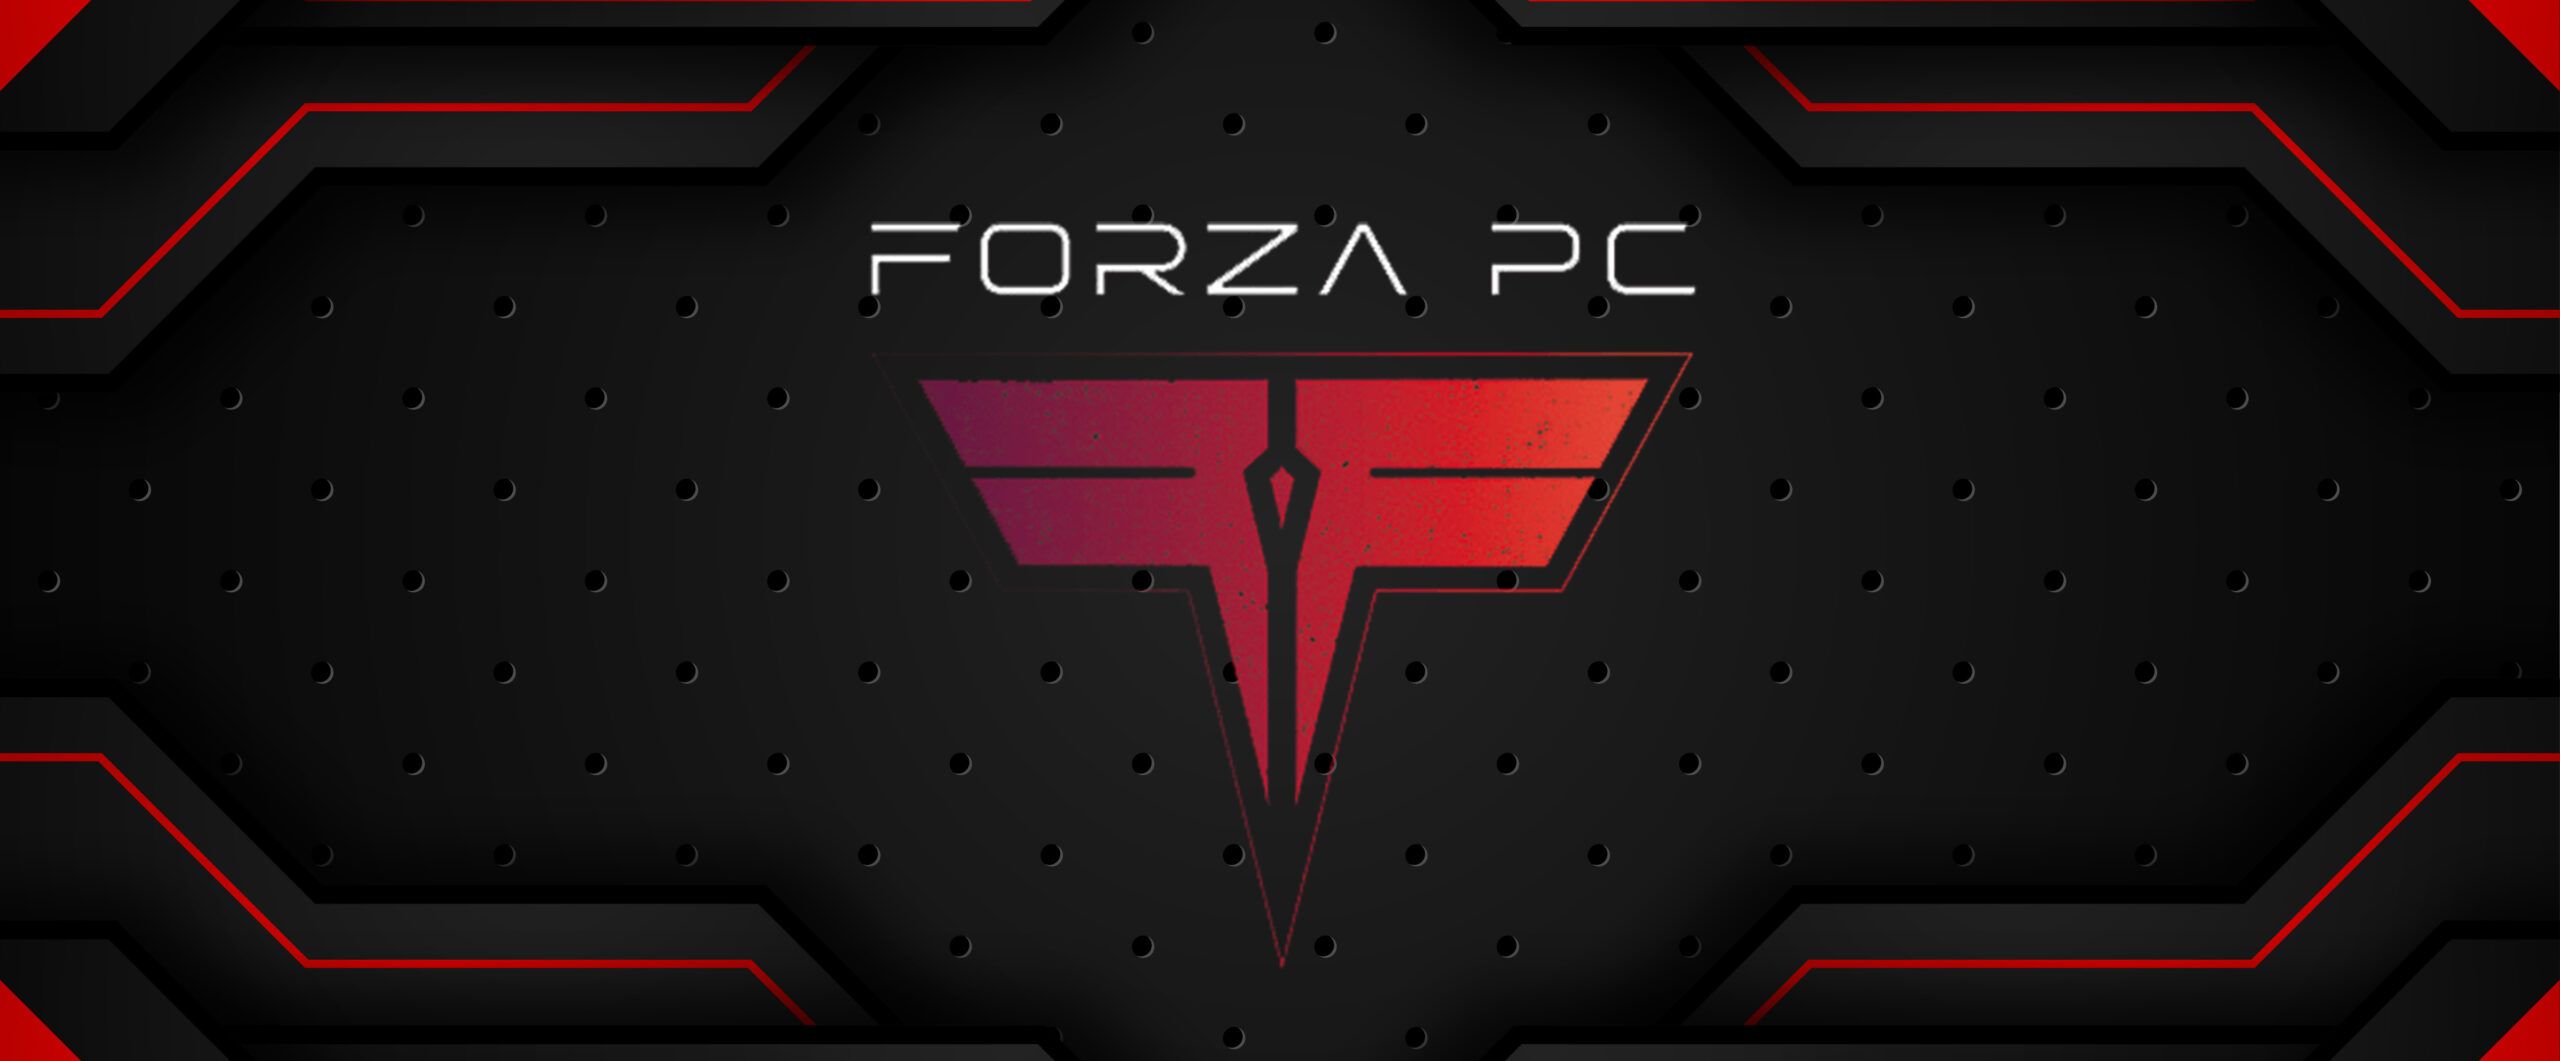 Cooperation forza pc